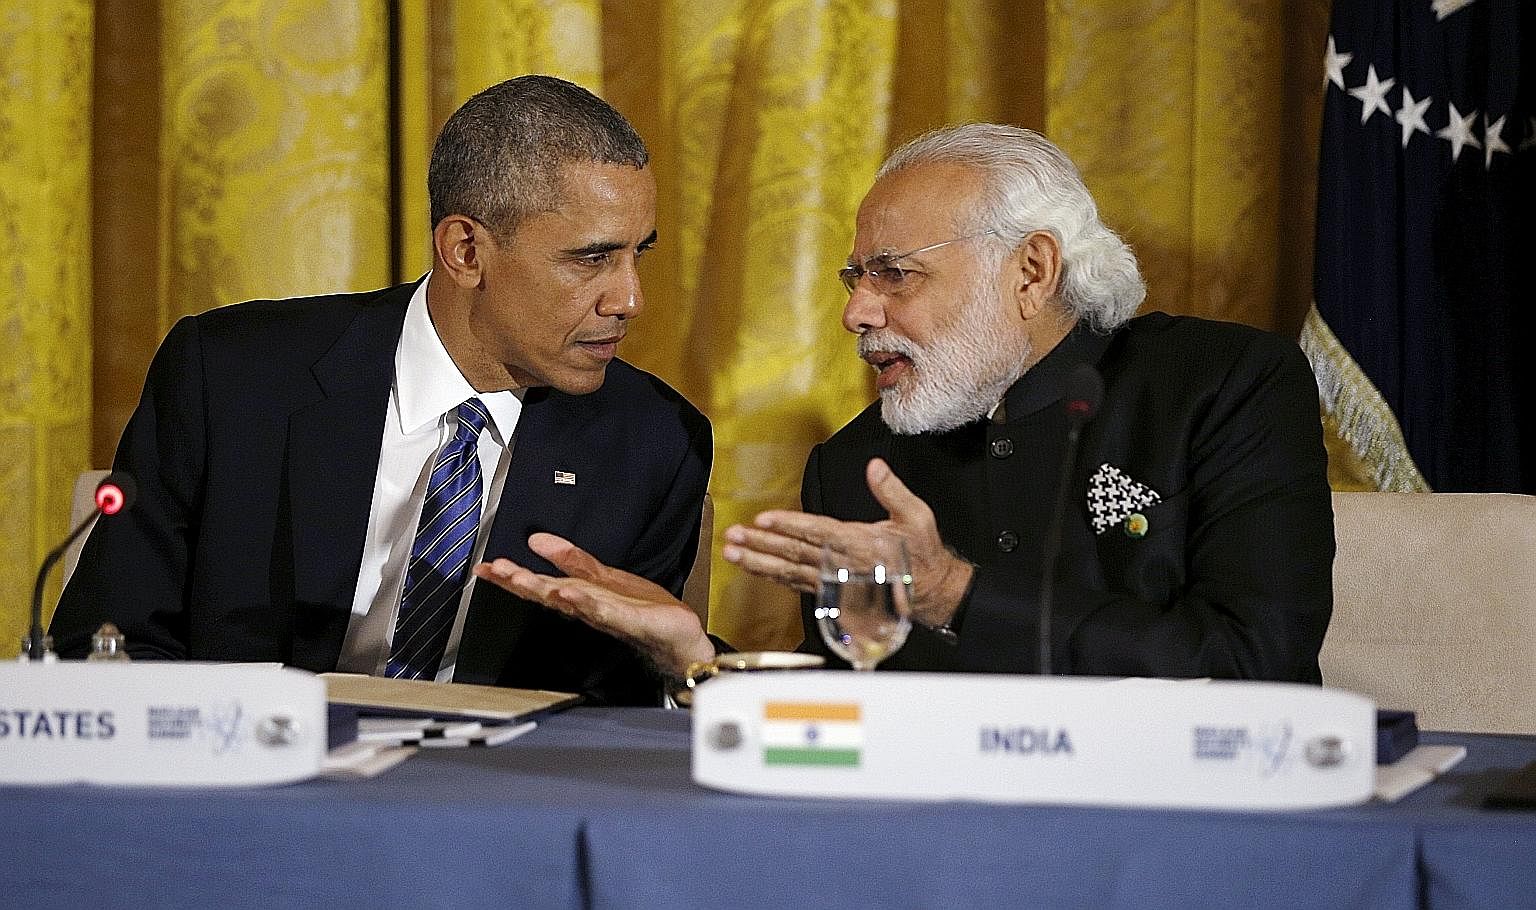 Mr Obama speaking with Mr Modi during a working dinner at the White House earlier this year. The two leaders have developed a strong personal rapport.